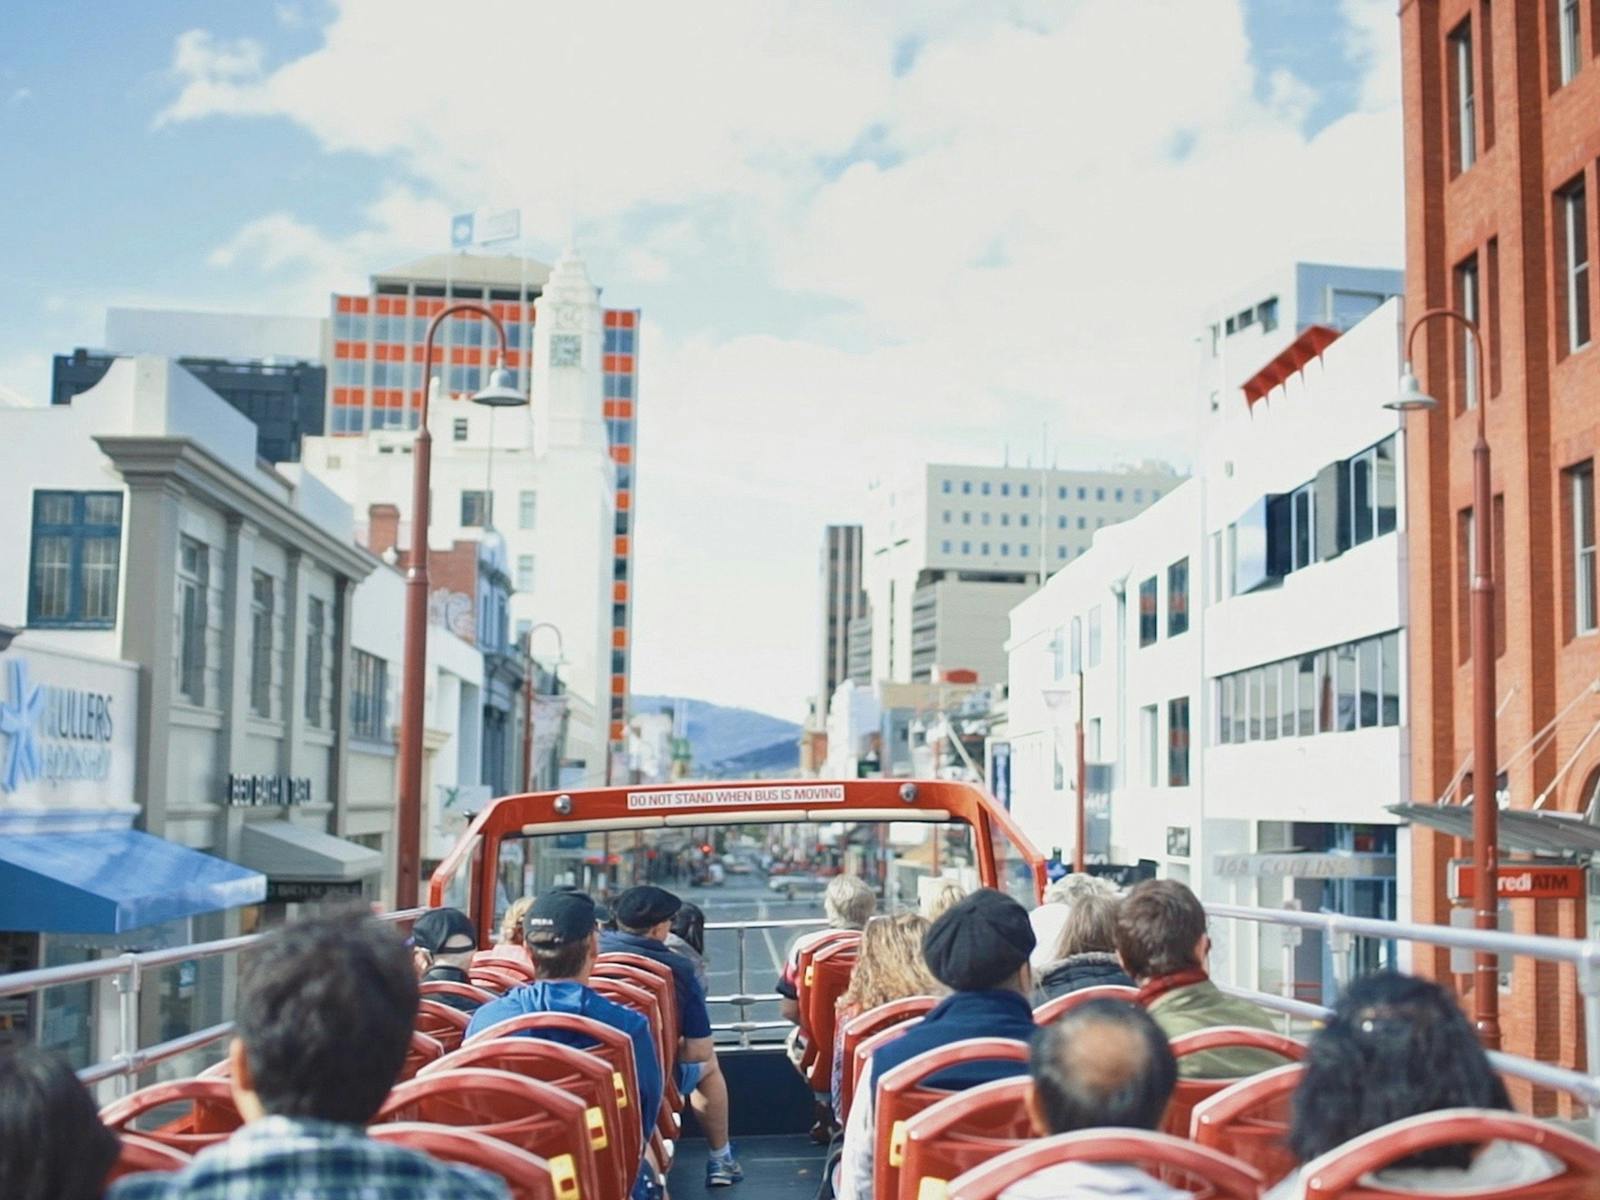 A double decker bus travels through the city streets of Hobart.